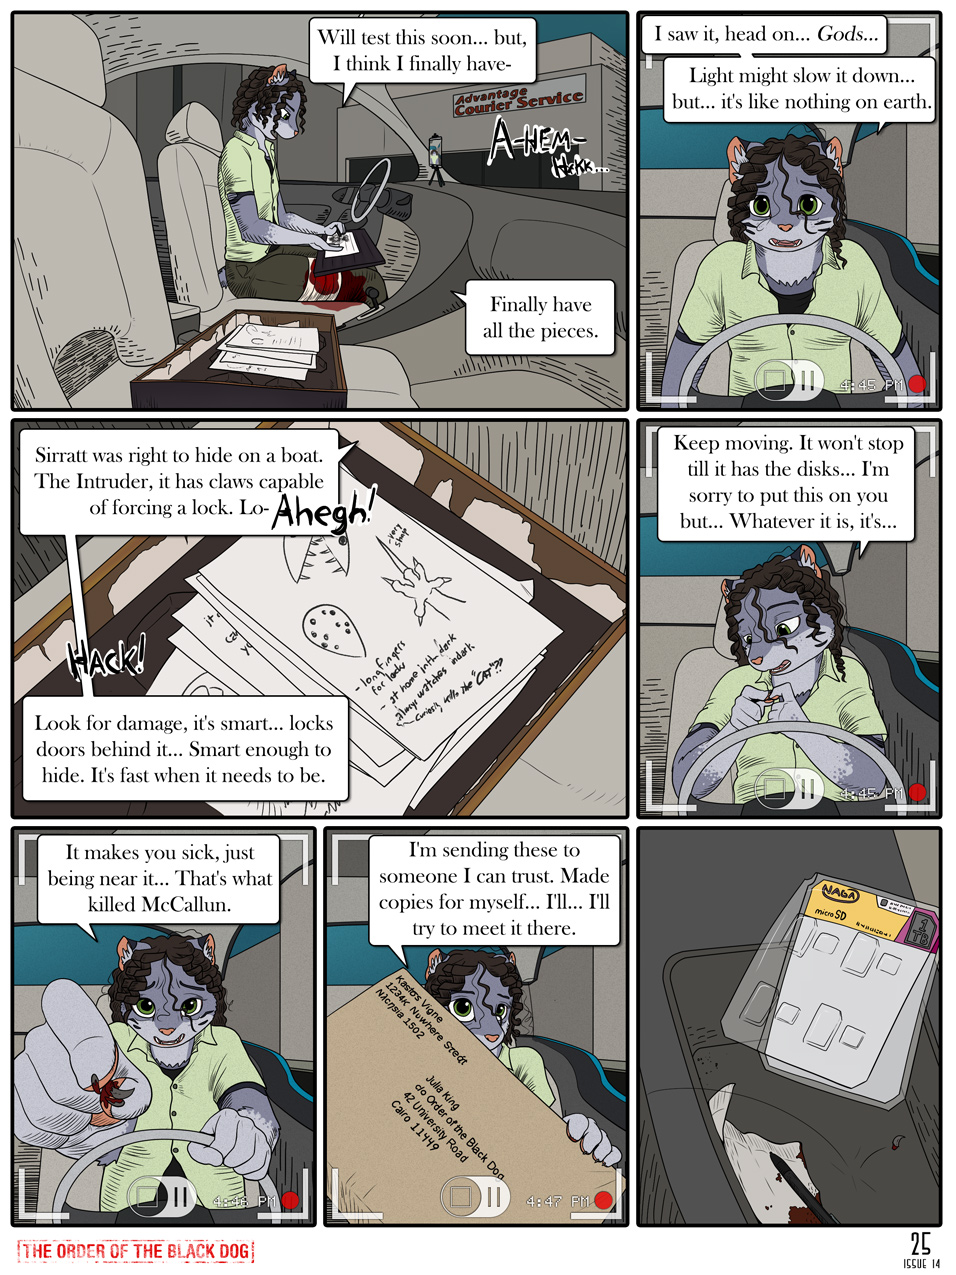 Issue 14, Page 25